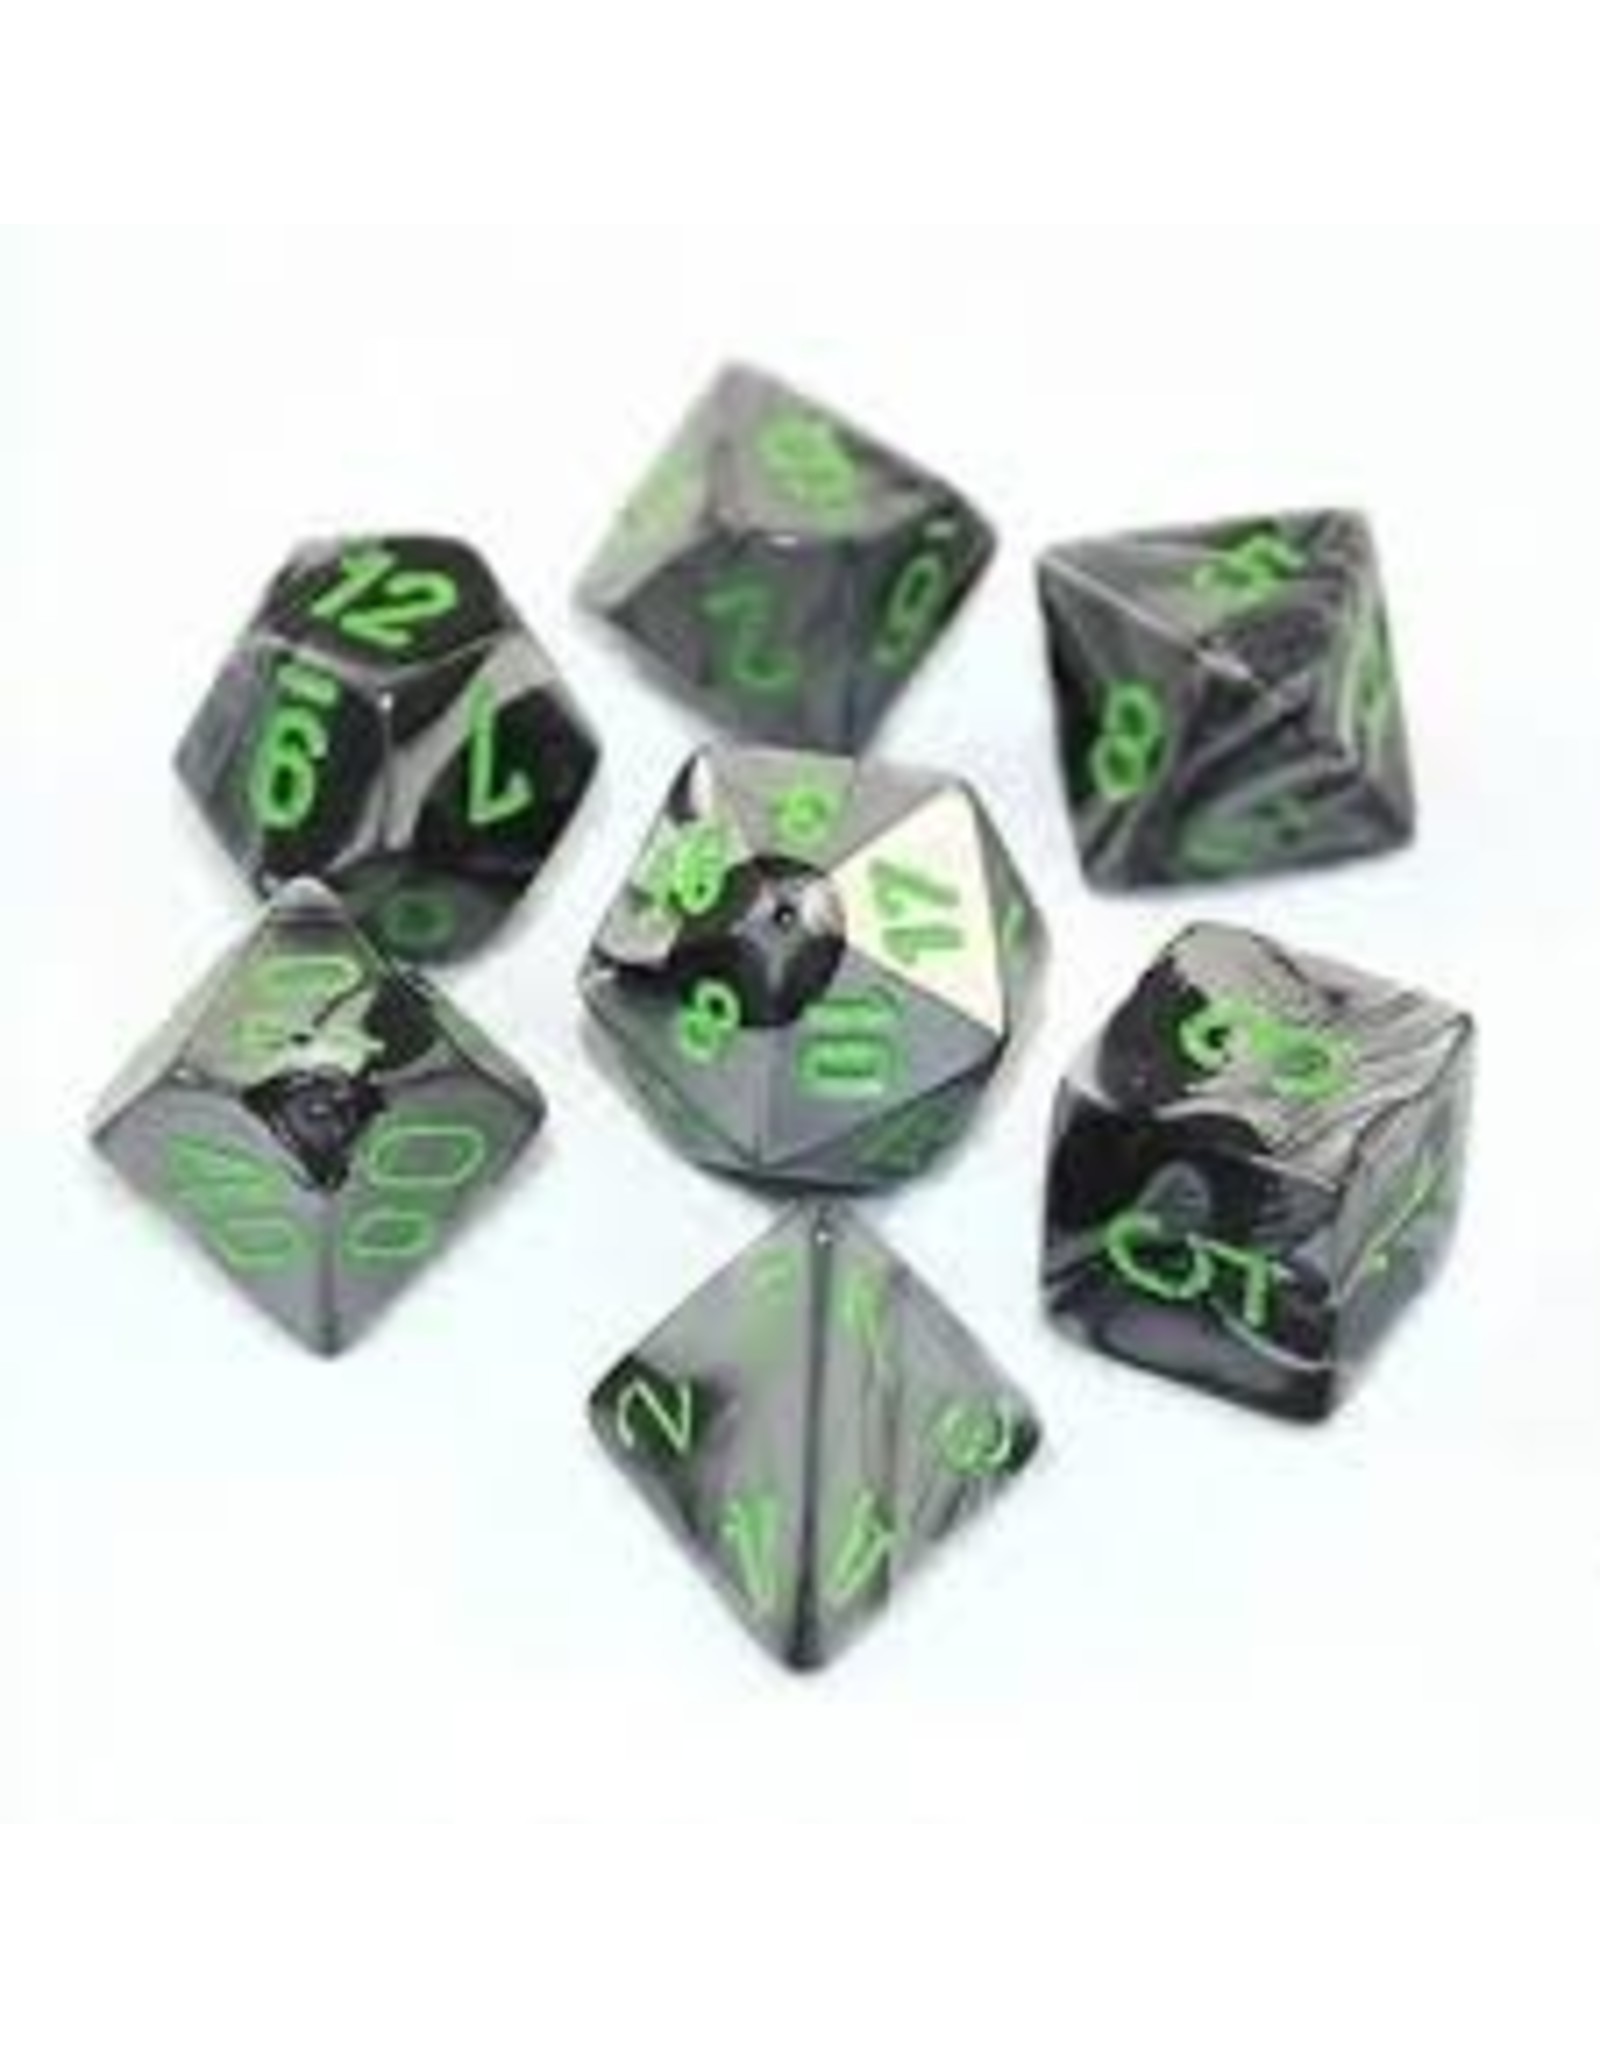 Chessex 7-Set Cube Gemini Black and Grey with Green